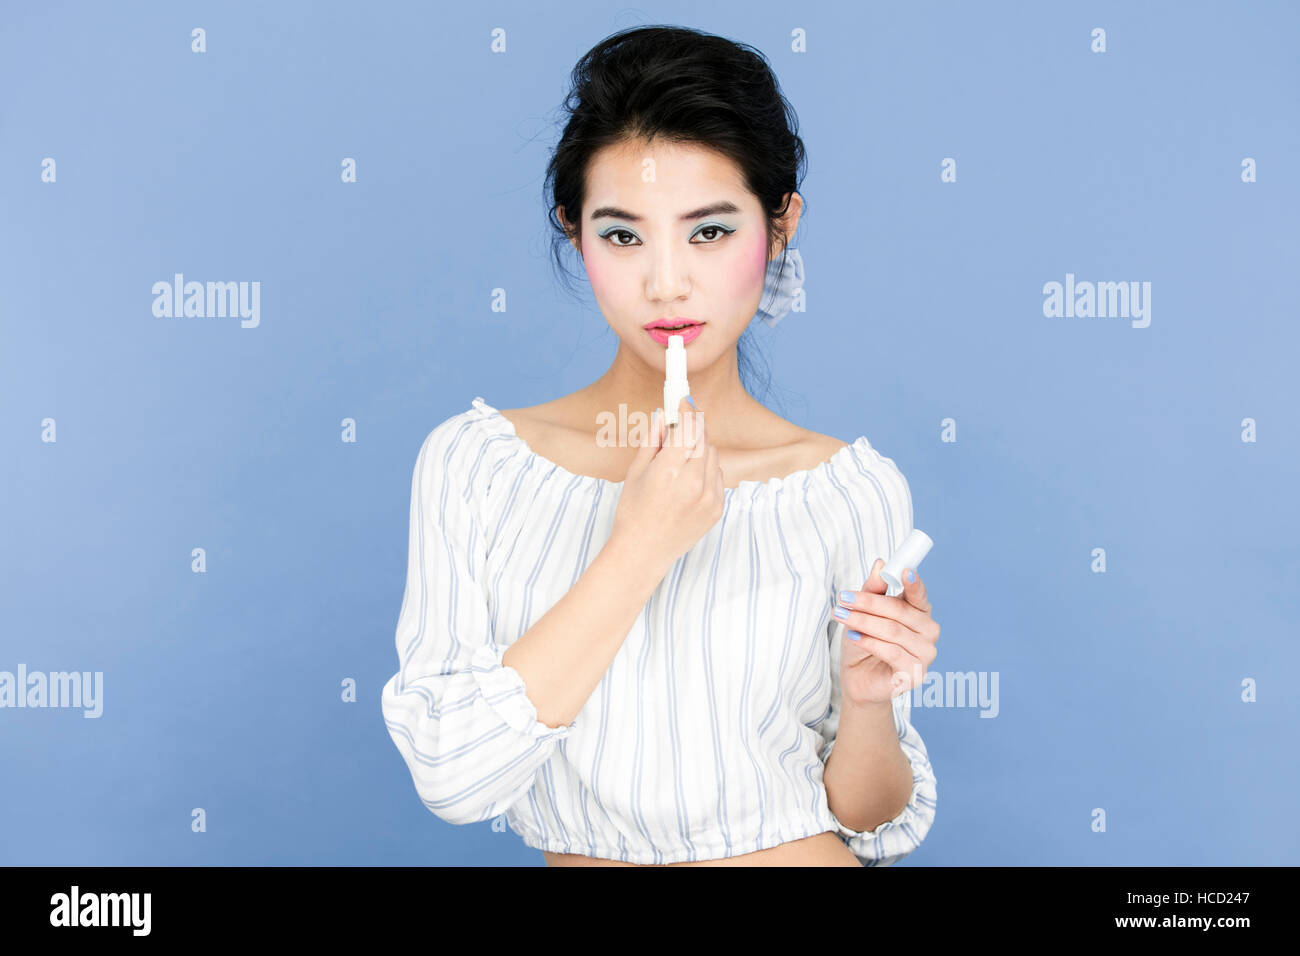 Portrait of young woman using lipstick Stock Photo